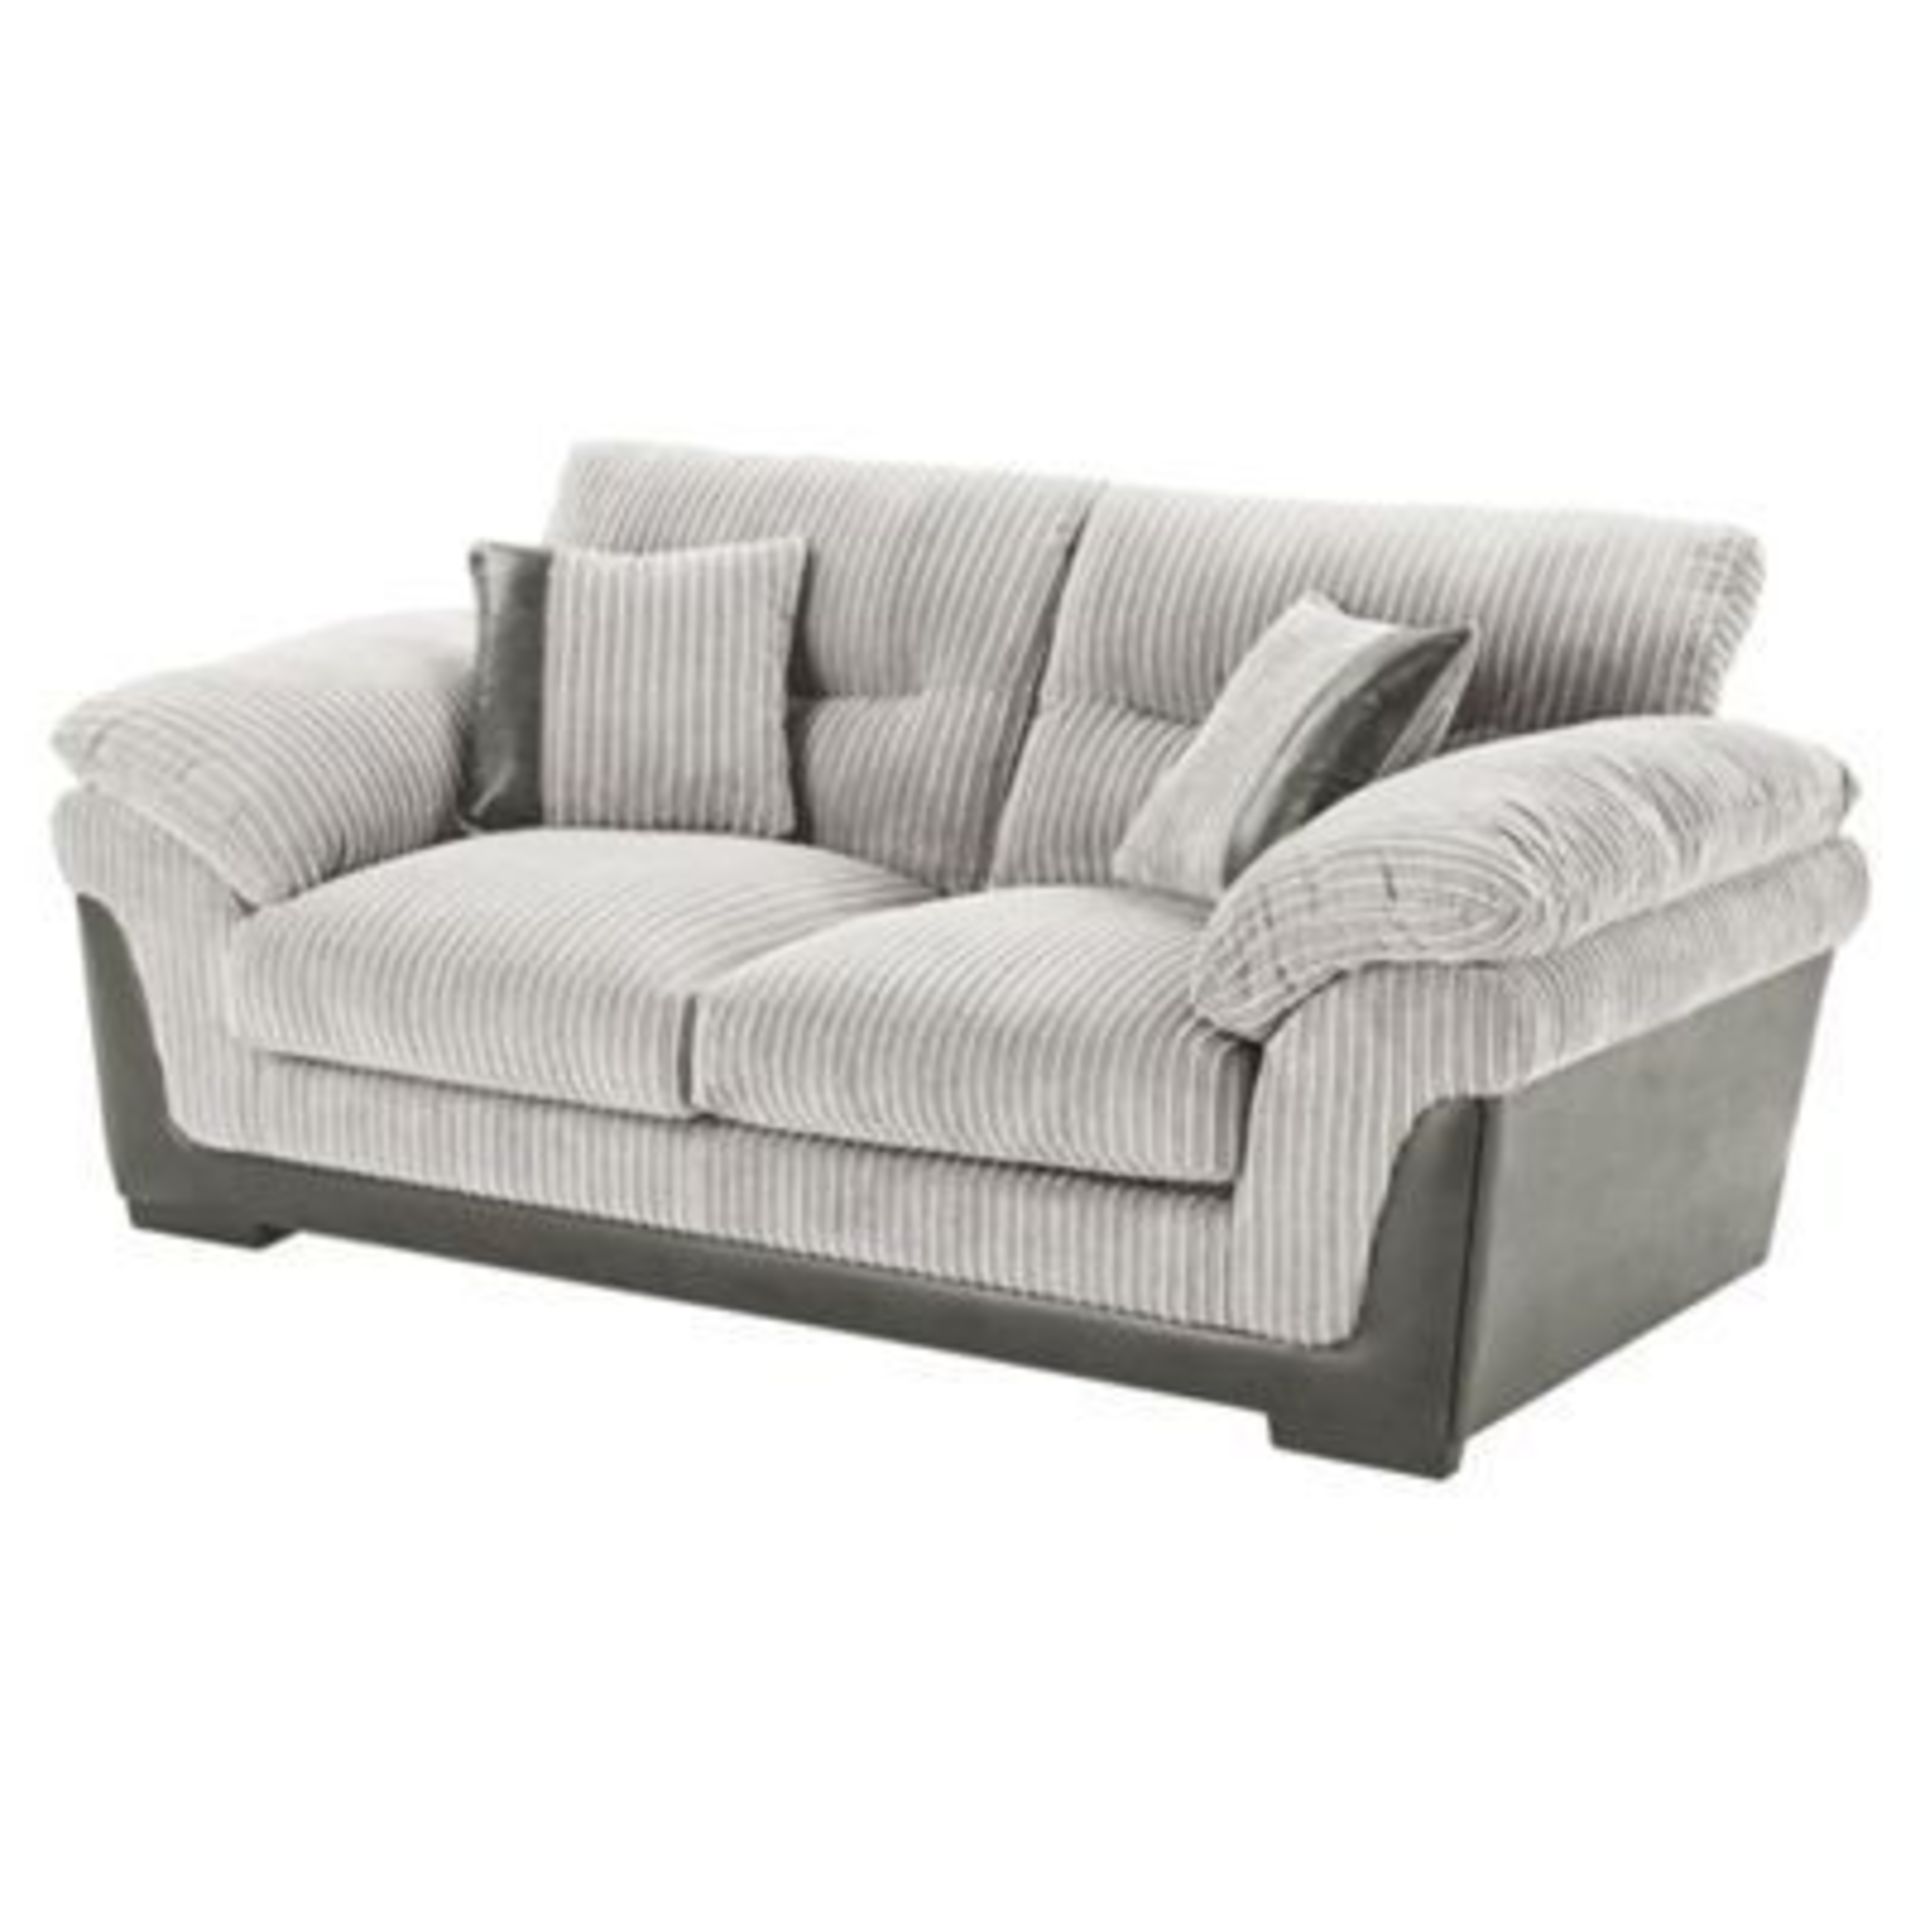 1 BRAND NEW BAGGED KENDAL 2.5 SEATER JUMBO CORD SOFA IN IN LIGHT GREY (VIEWING HIGHLY RECOMMENDED)